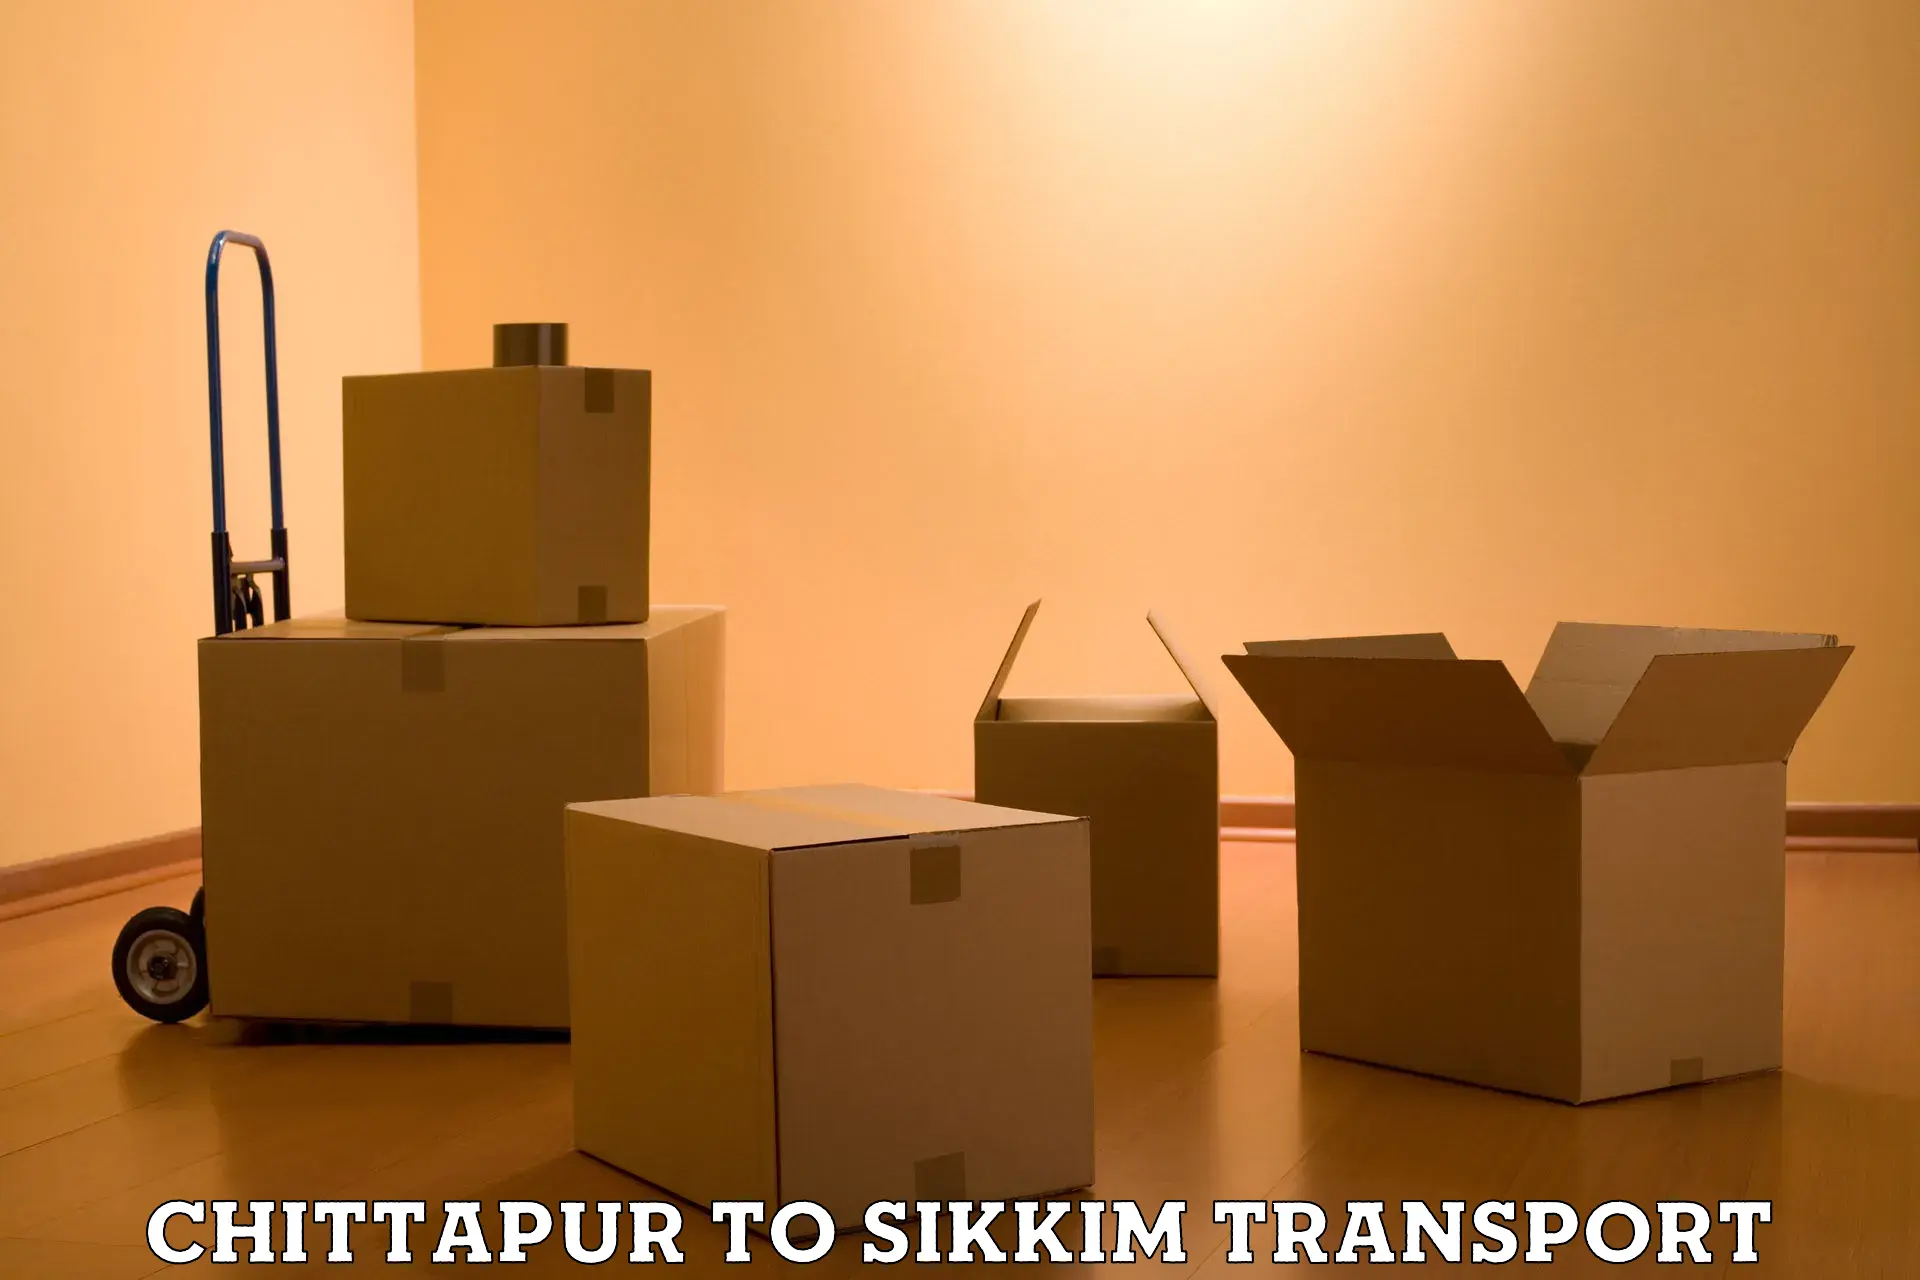 Furniture transport service in Chittapur to North Sikkim